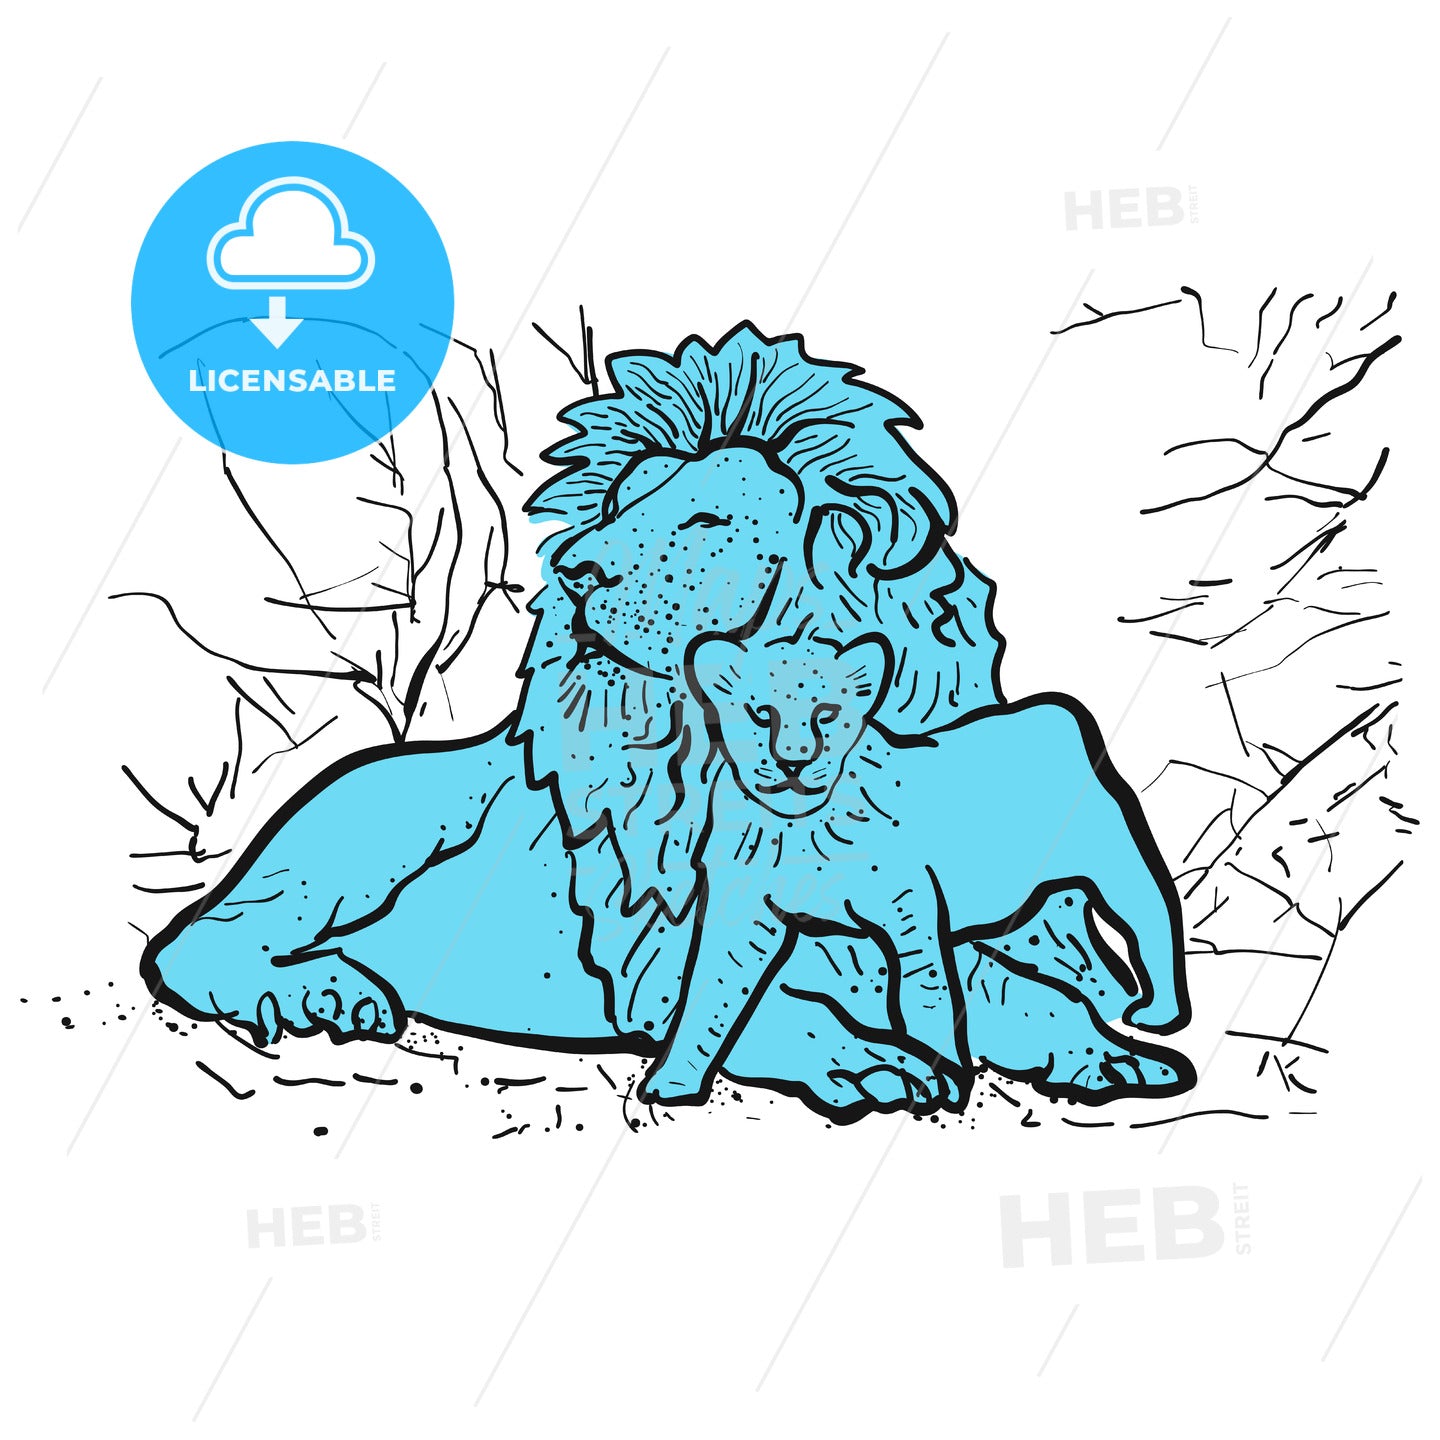 Old lion and young lion in front of shrubs – instant download